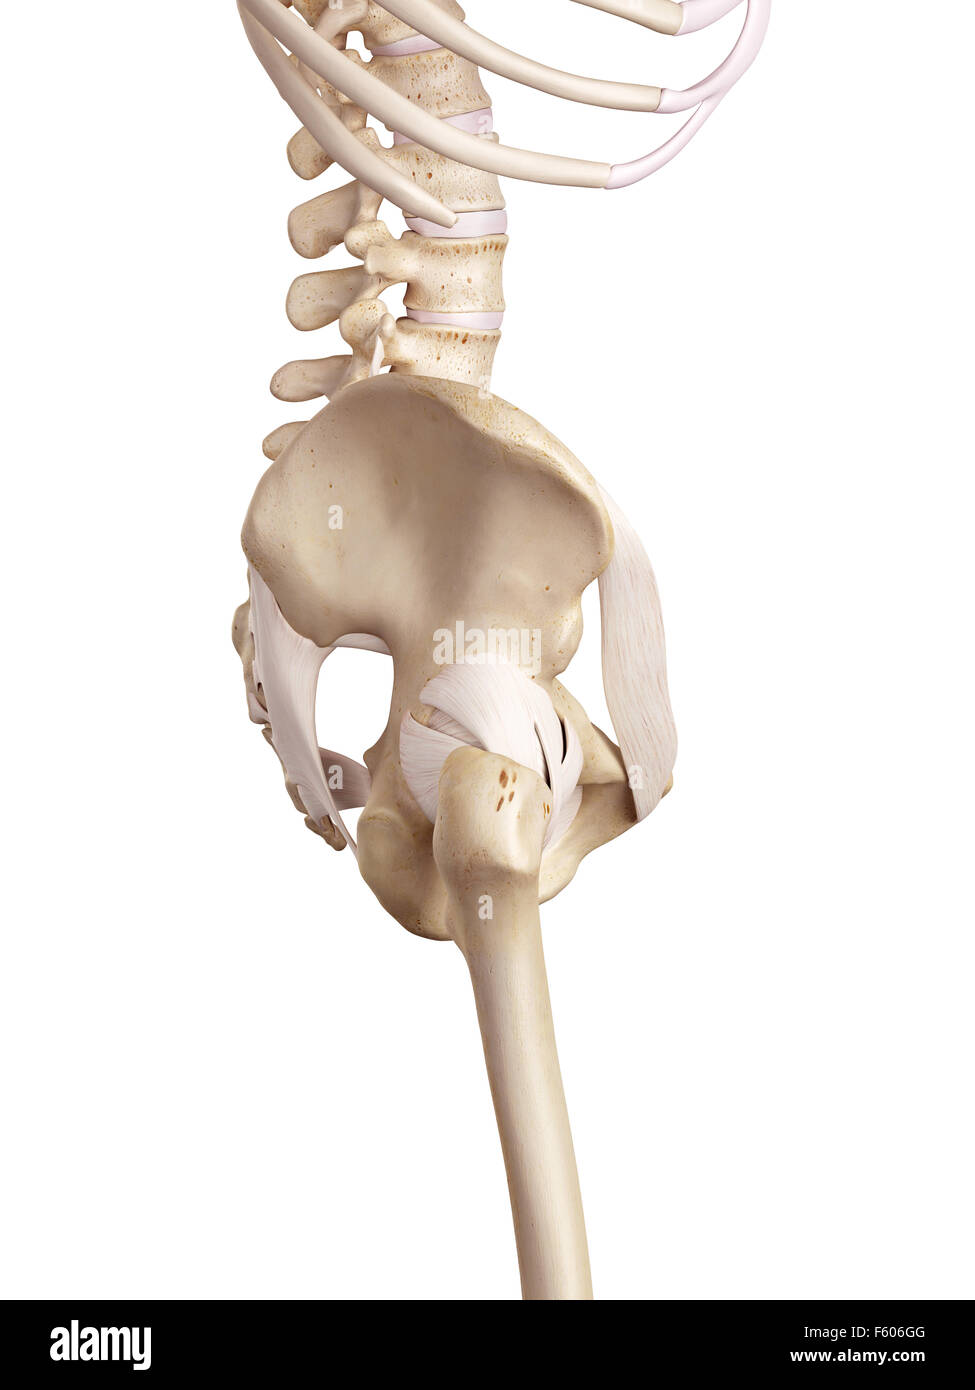 medical accurate illustration of the hip ligaments Stock Photo